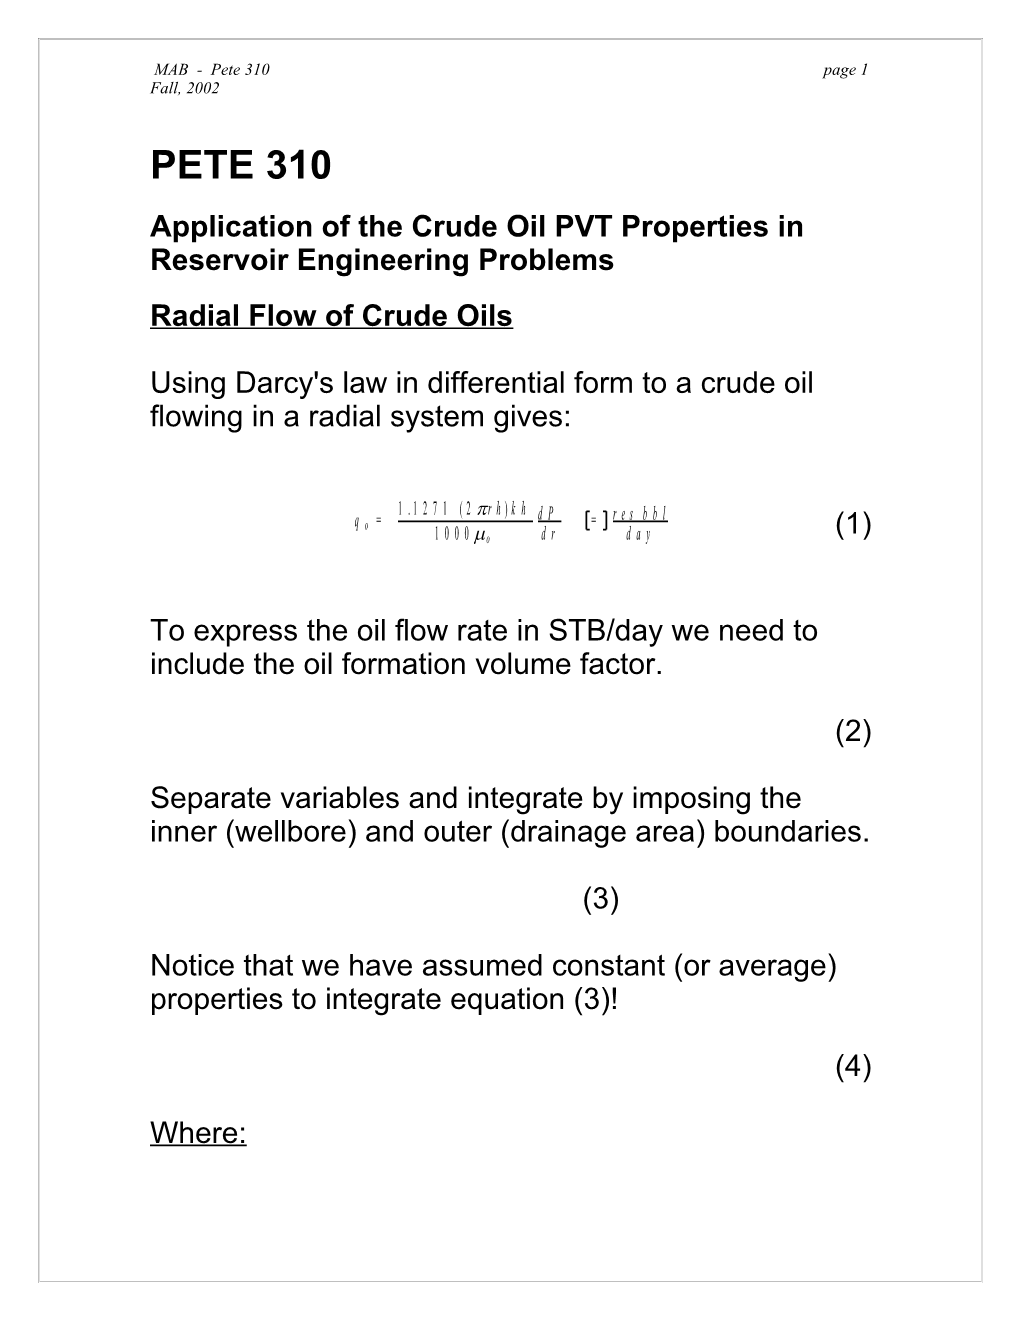 Application of the Crude Oil PVT Properties in Reservoir Engineering Problems